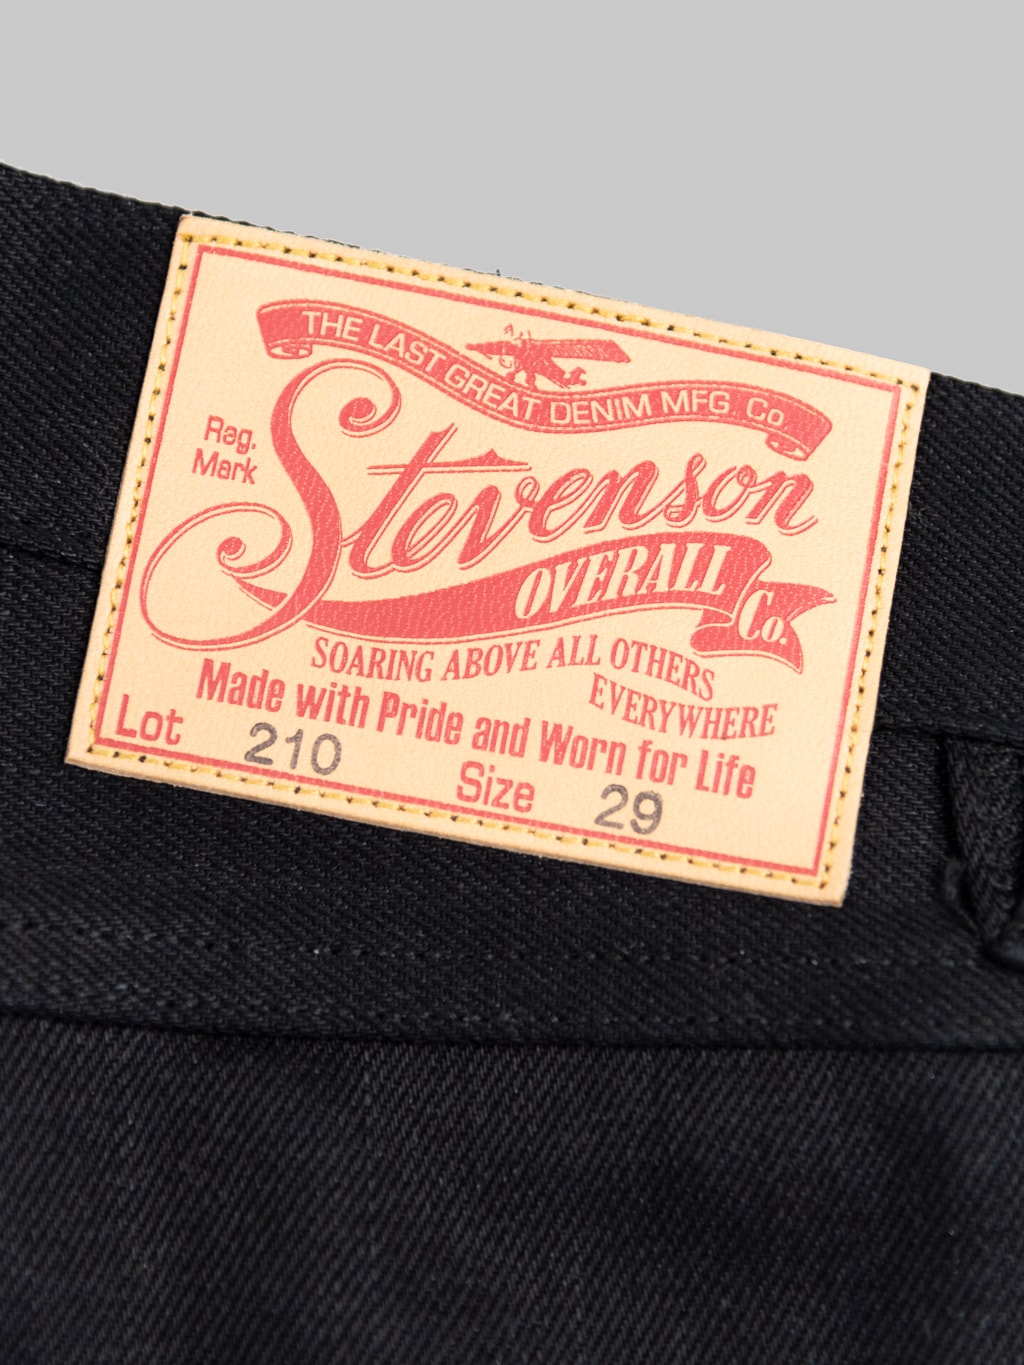 Stevenson Overall Big Sur 210 Slim Tapered jeans solid black leather patch